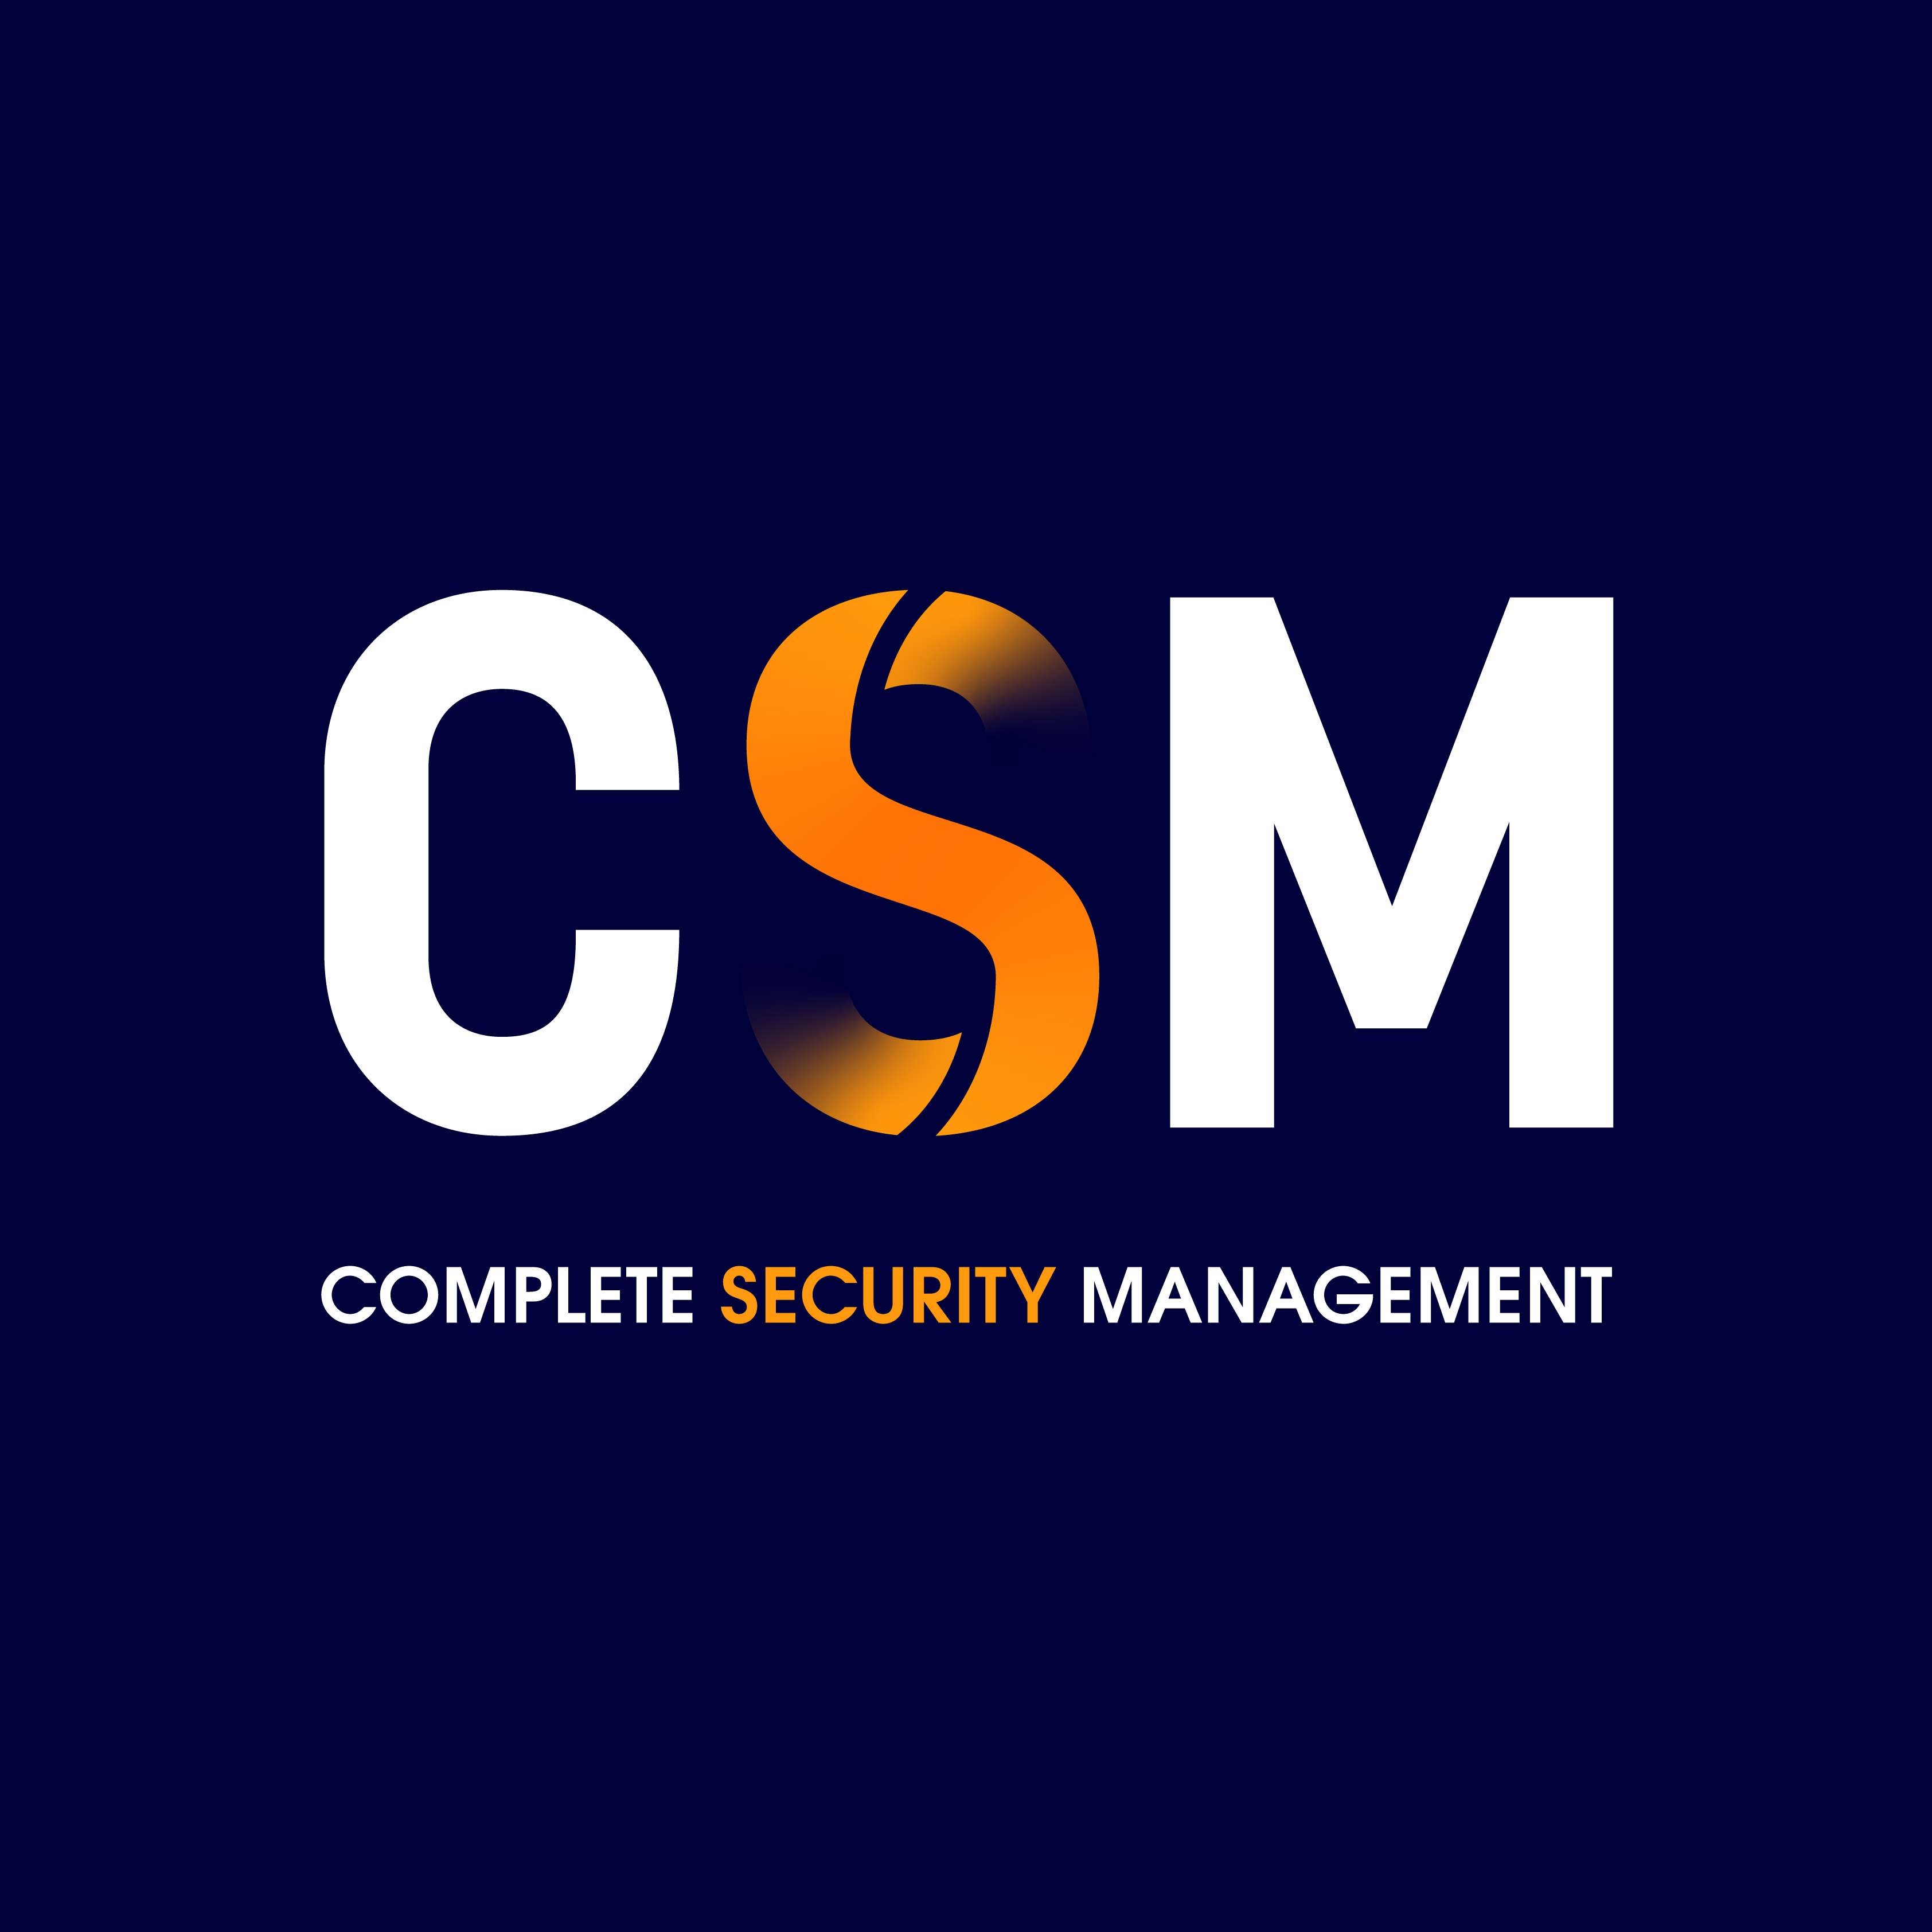 Company Logo for CSM Services Group